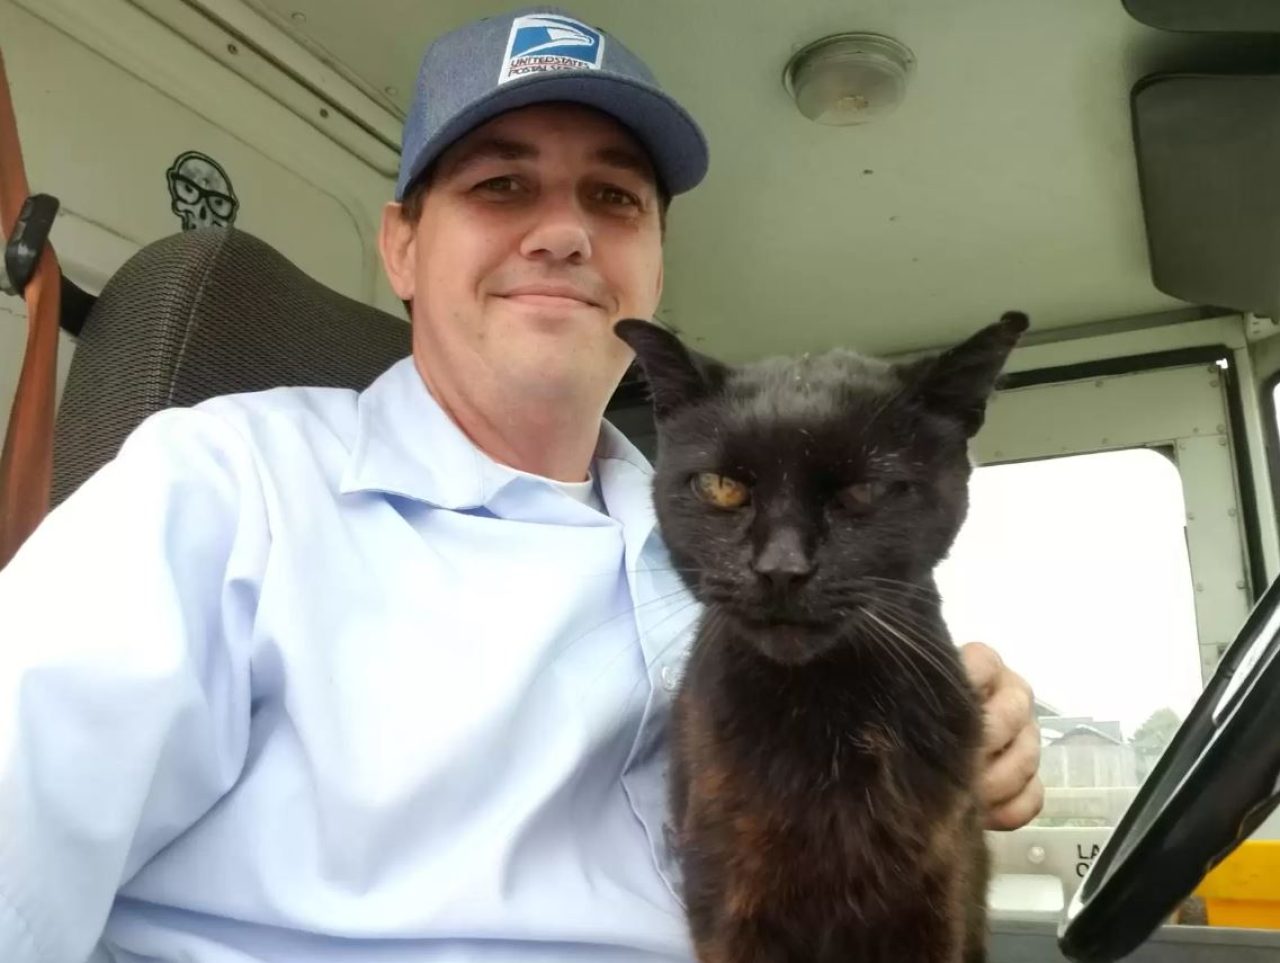 Special Bond: A Senior Cat Always Greets The Mailman With Love